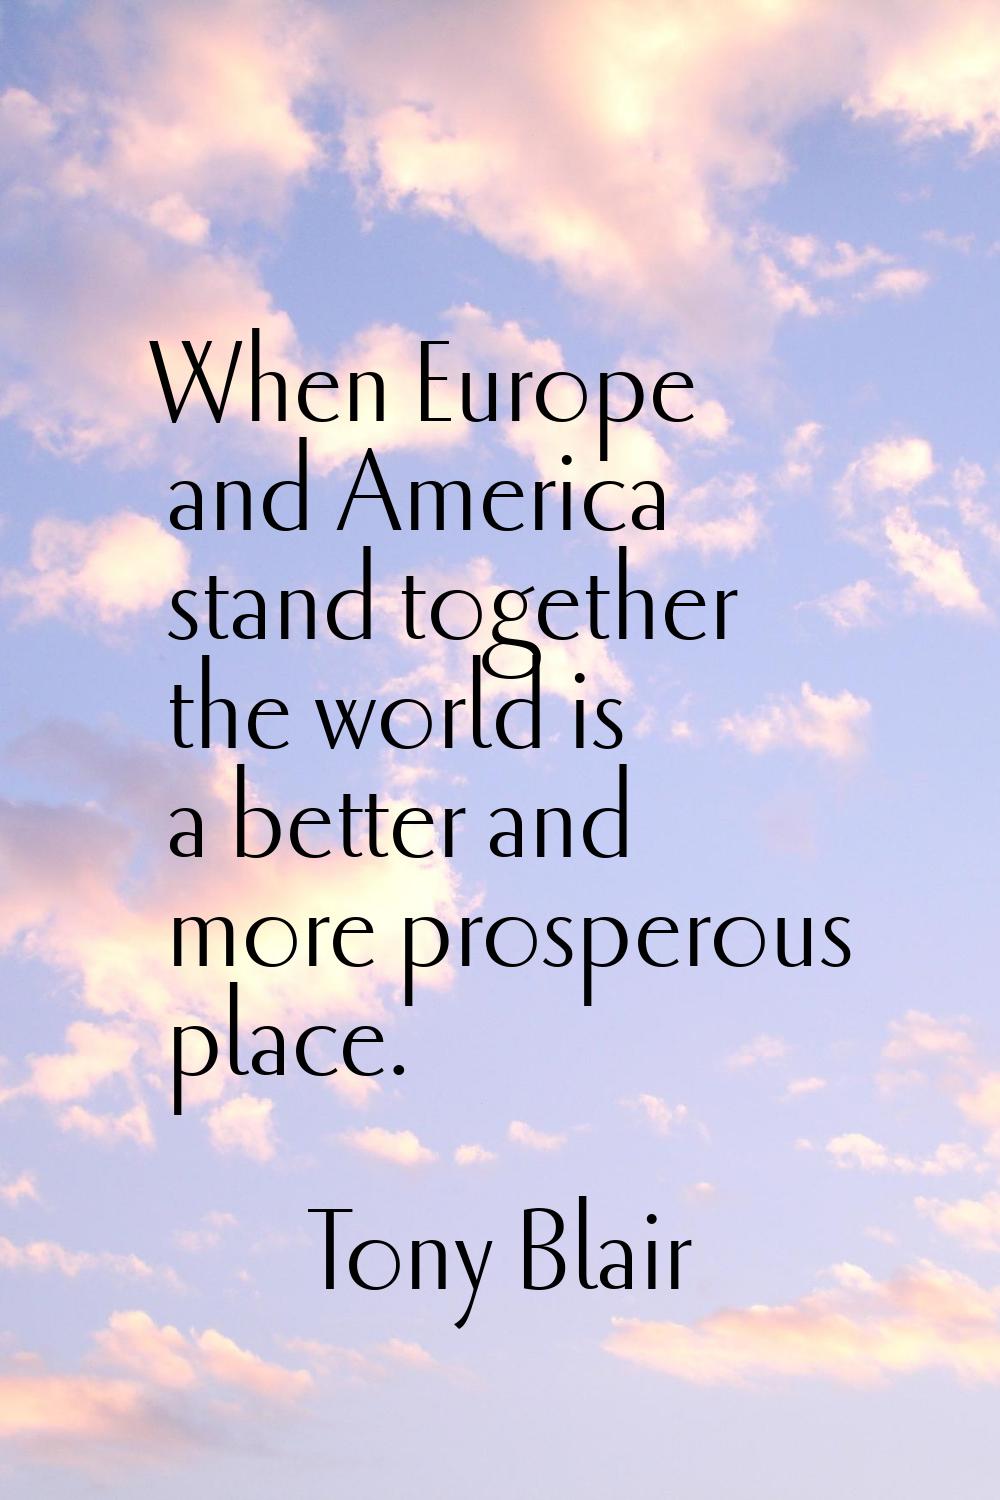 When Europe and America stand together the world is a better and more prosperous place.